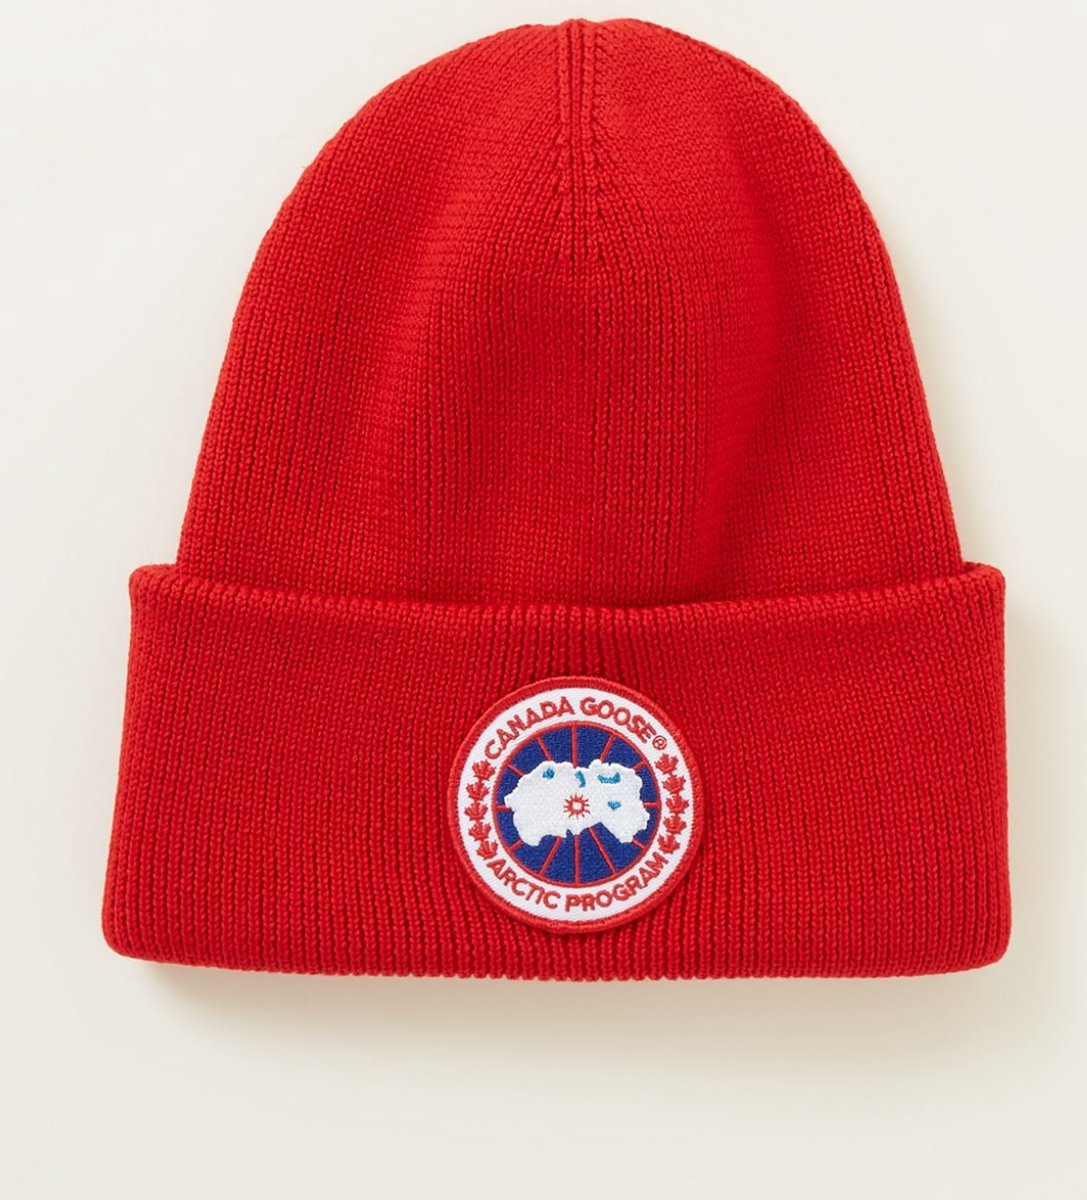 Canada Goose Muts - Rood - One Size | bol